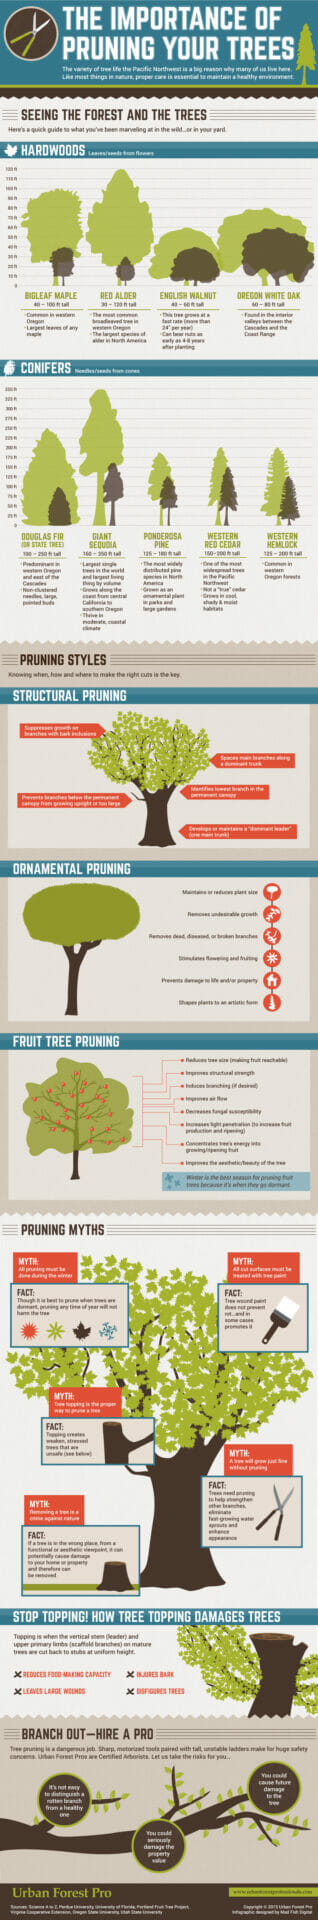 UFP_Pruning_Infographic